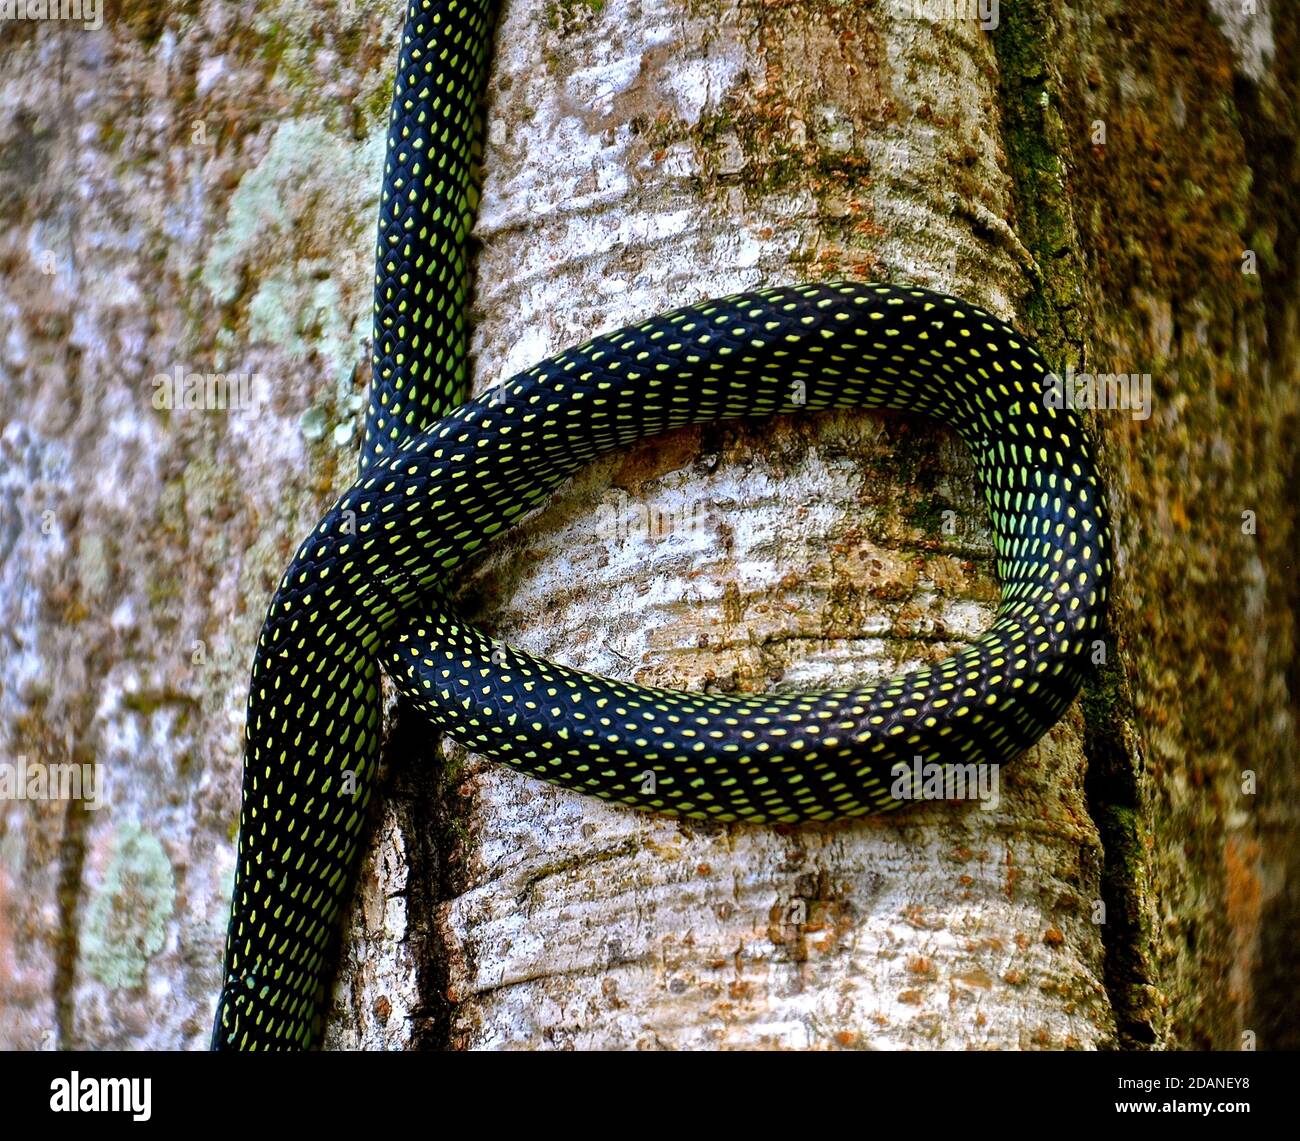 Close up view of the body of a black and green tree snake coiled on the trunk of a tree. Stock Photo